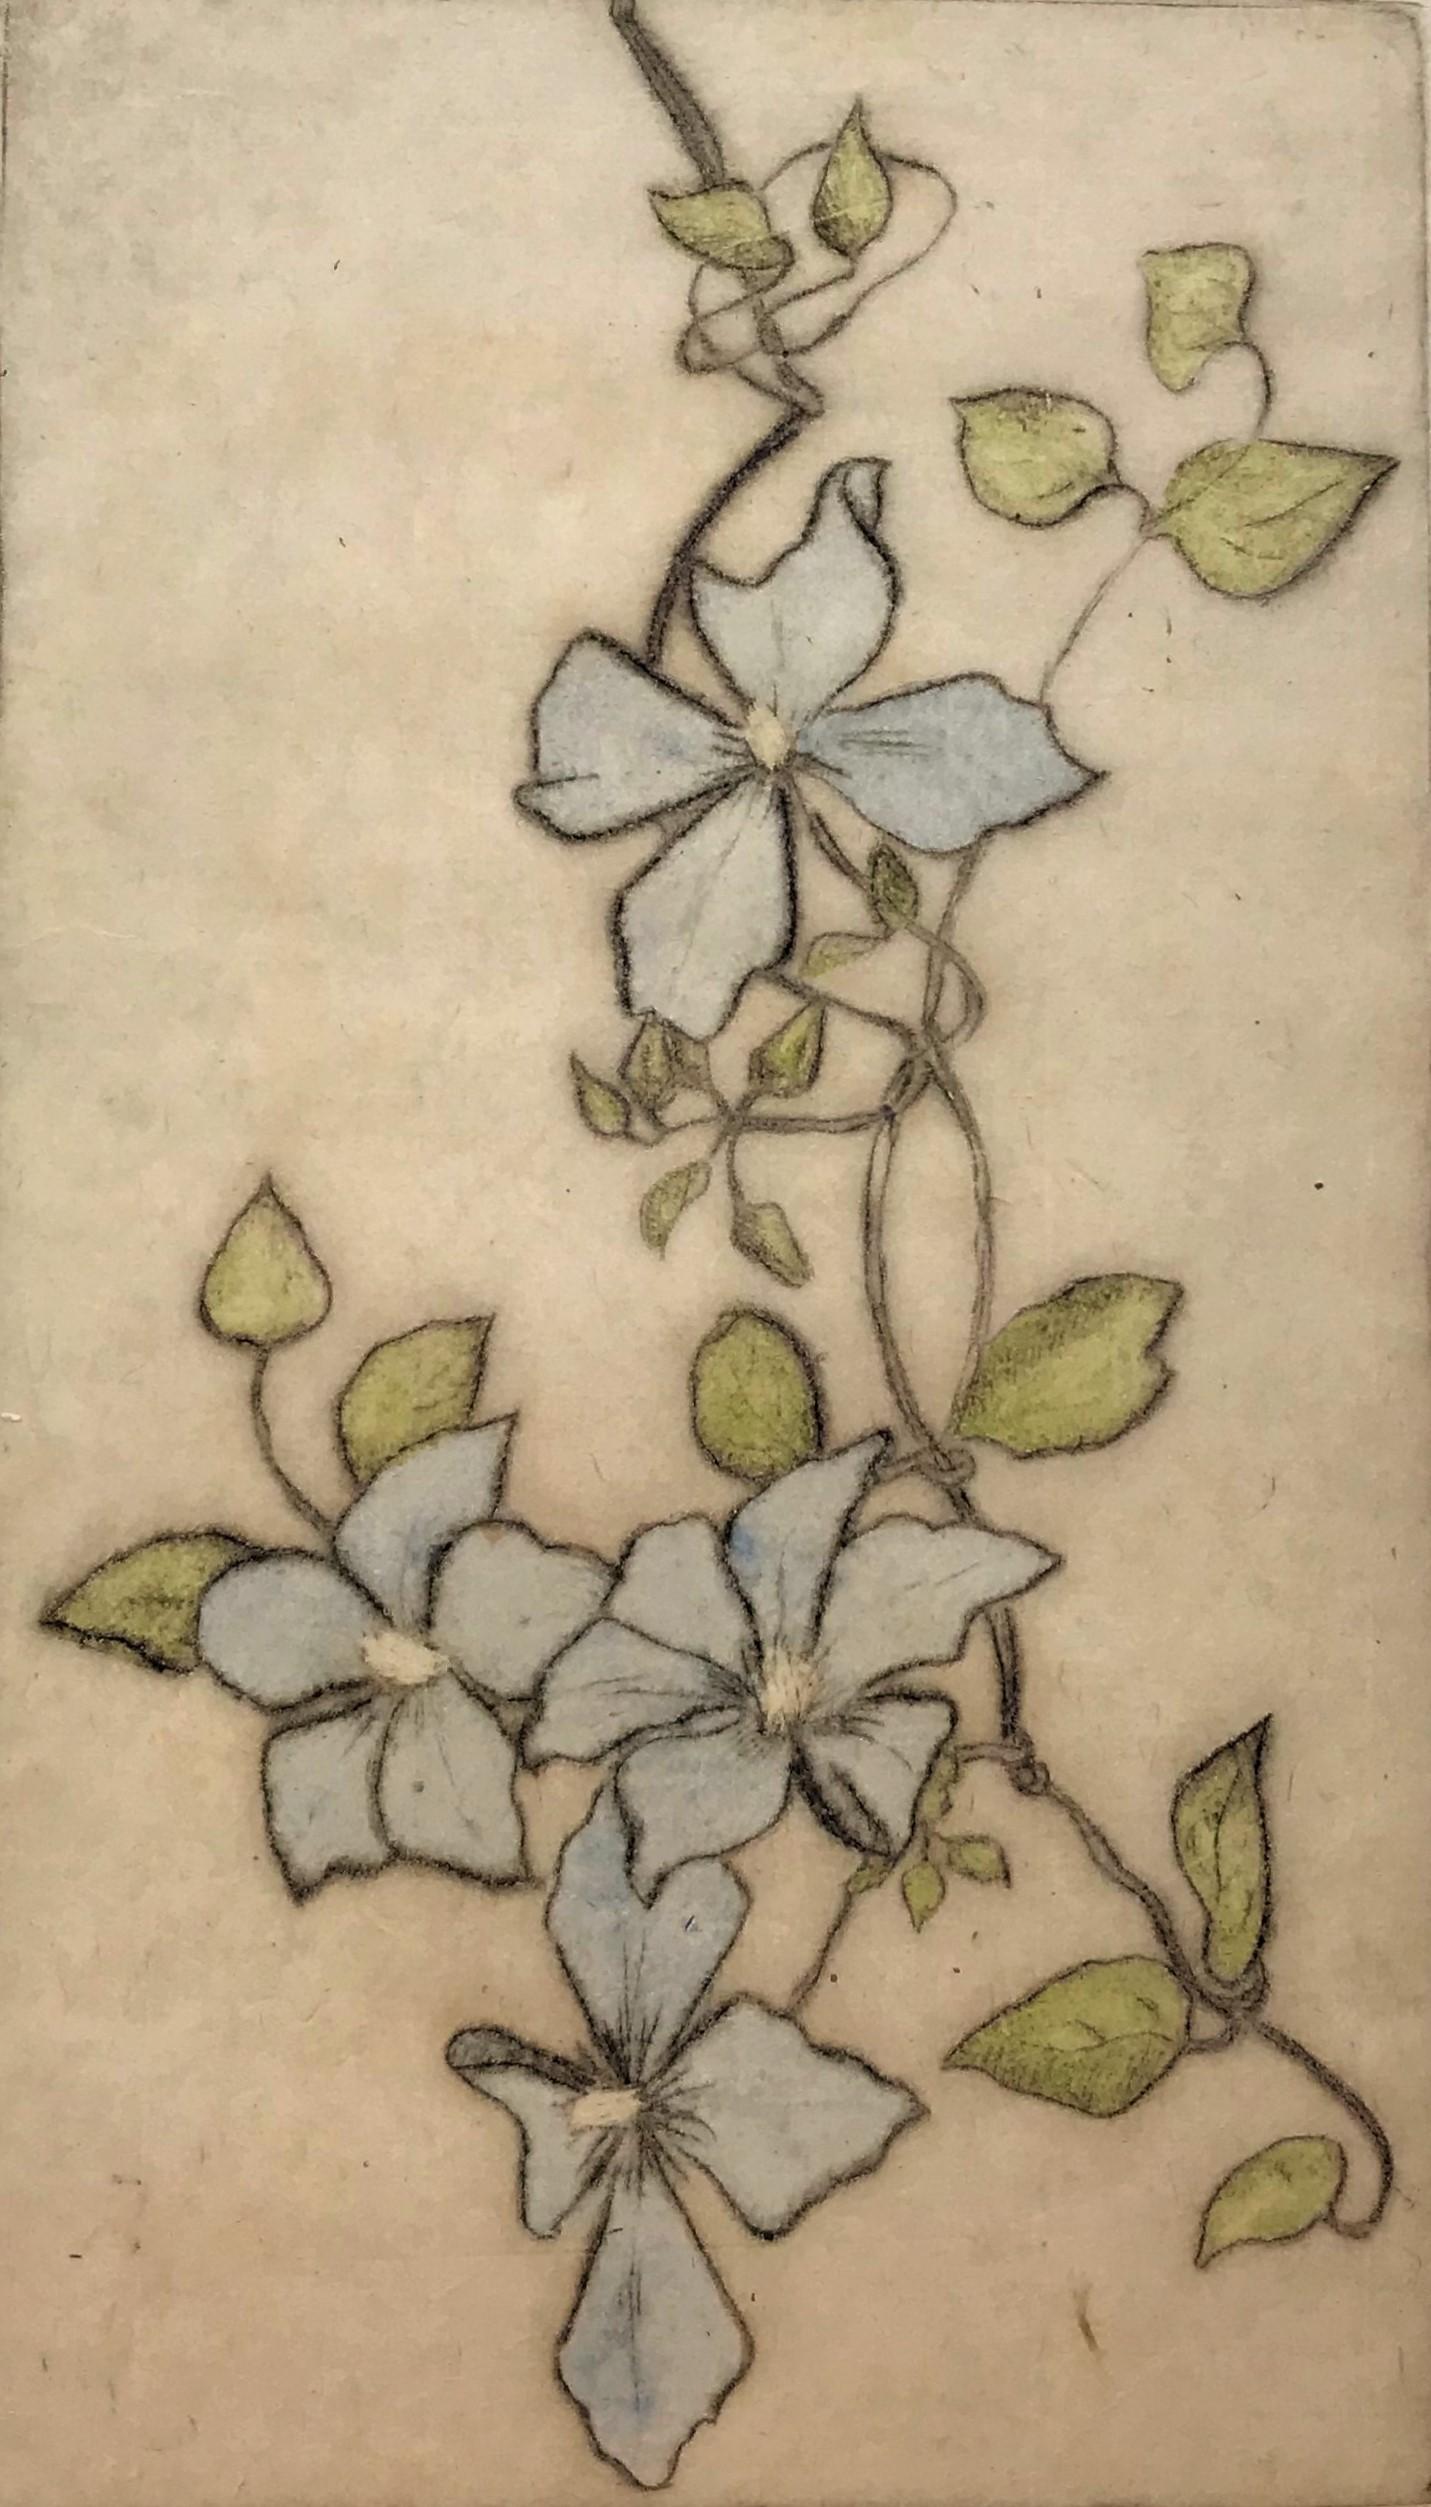 Clematis (Clematis integrifolia). 1933. Drypoint with hand coloring. Jaques 407. 10 x 5 3/4 (sheet 13 3/8 x 7 7/8). Printed on Japanese mulberry paper. Unsigned. Provenance: the artist's estate. Housed in a 20 x 16-inch archival mat, suitable for